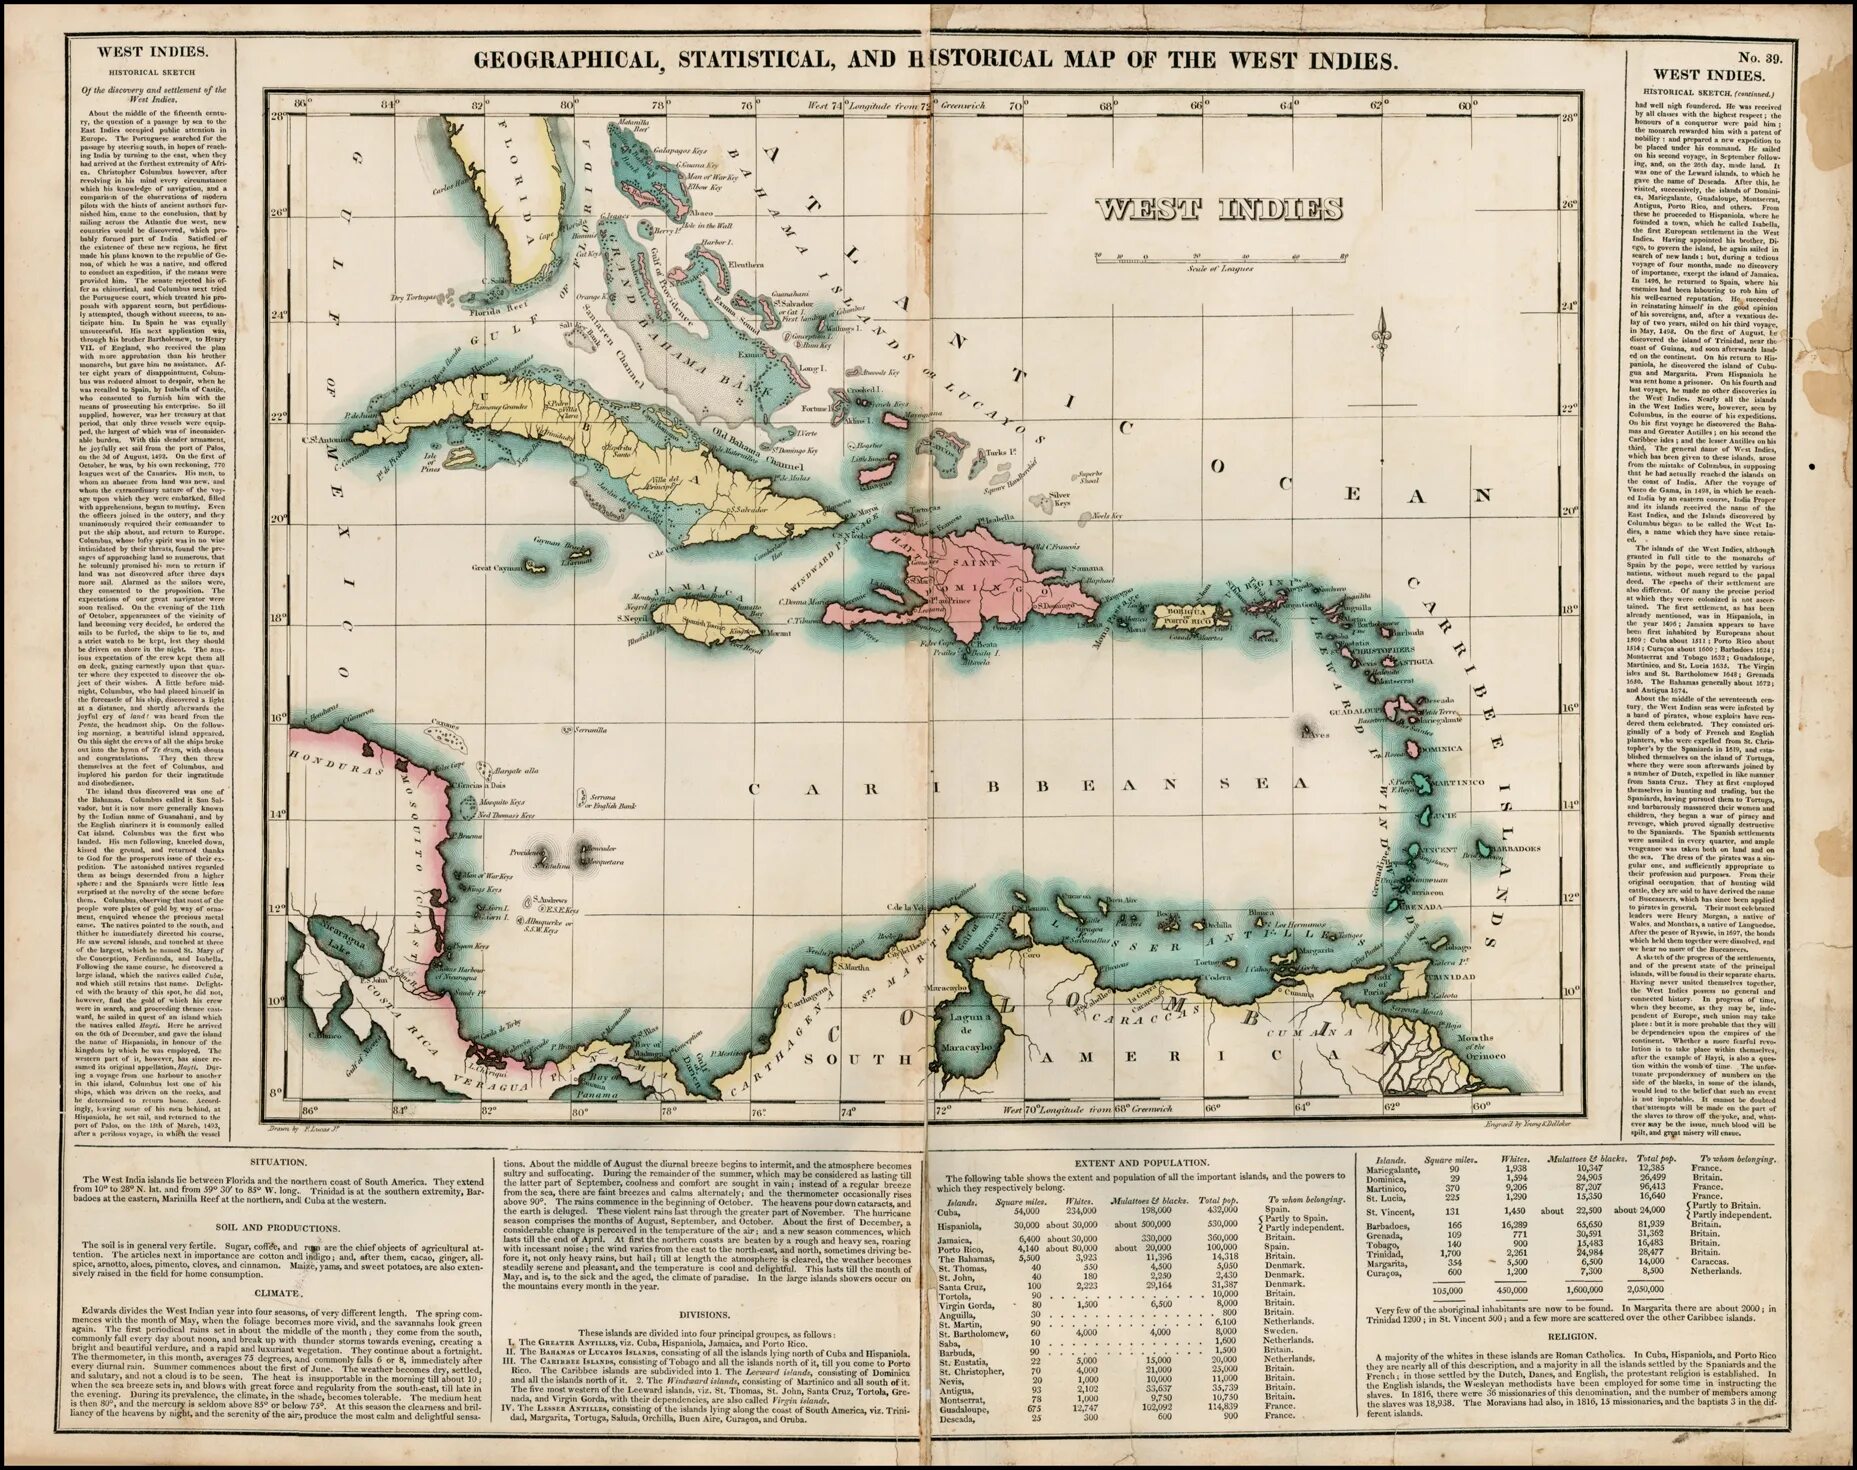 Historic and historical. West Indies Map. West Indies на карте. The story Map of the West Indies. Carey’s 1822 geographical, historical and Statistical Map.